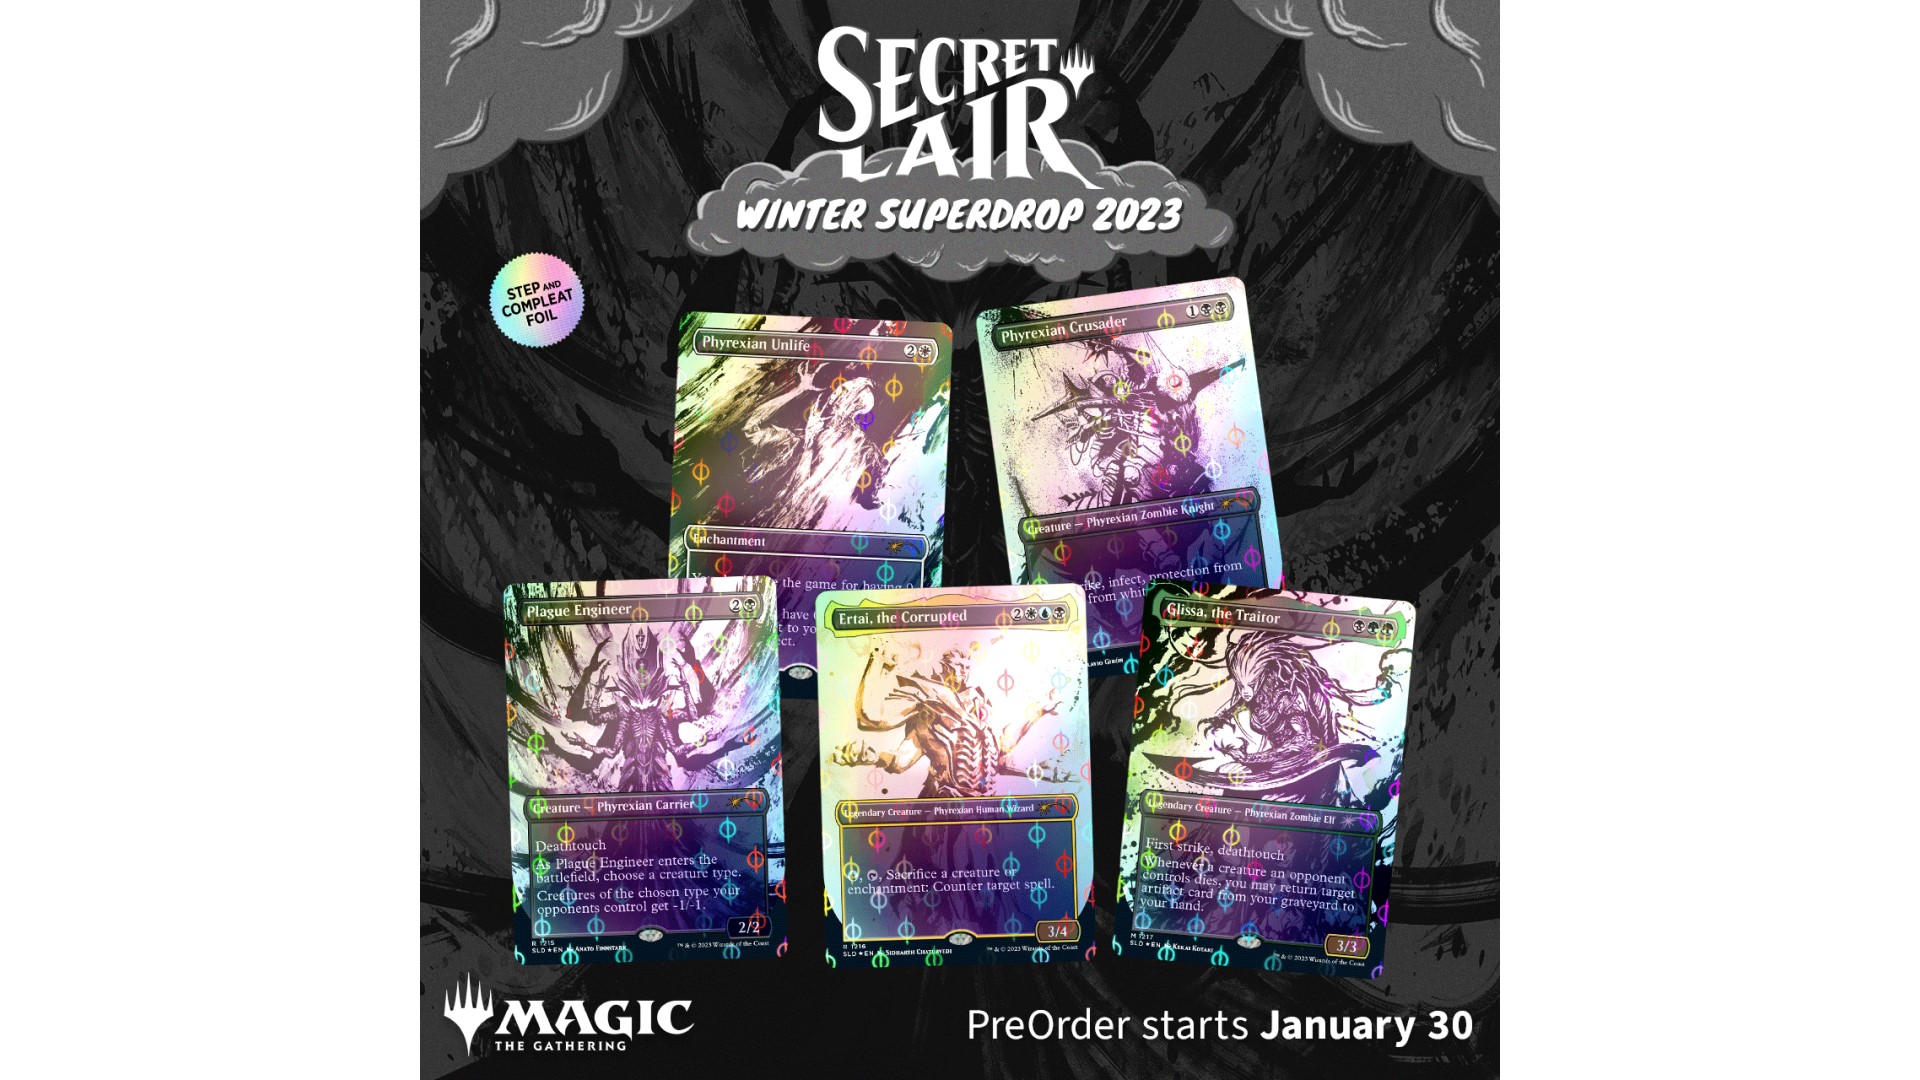 MTG Secret Lair drop has snakes, 90s glitter, and anime fashion